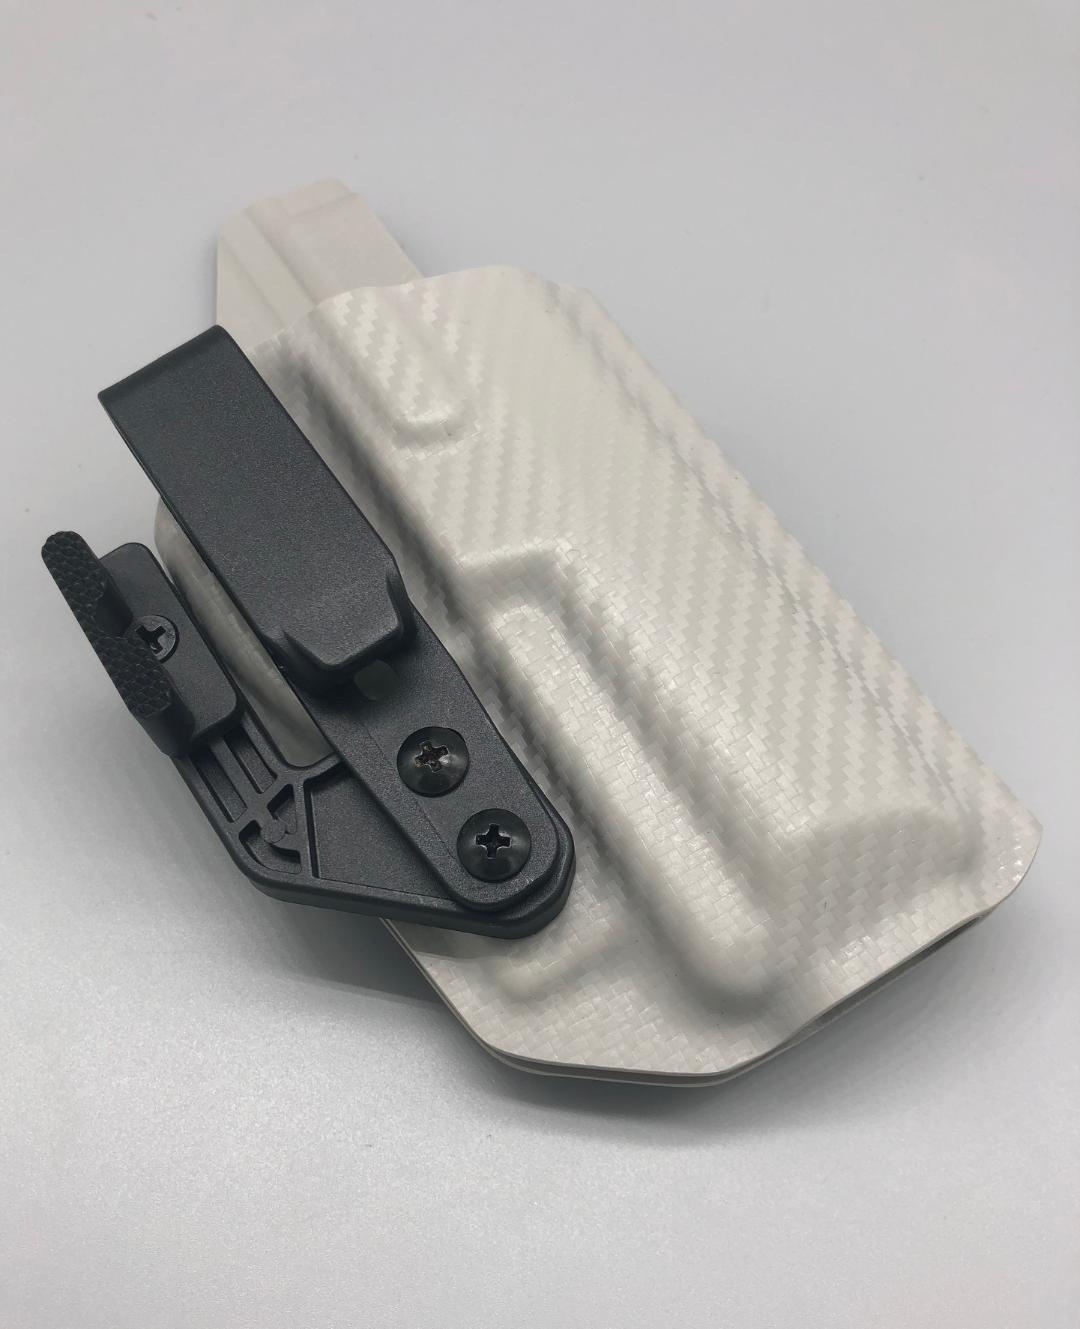 USA Veteran Made Details about   CZ P09 Tan Kydex IWB Proteus Holster with Mod Wing 